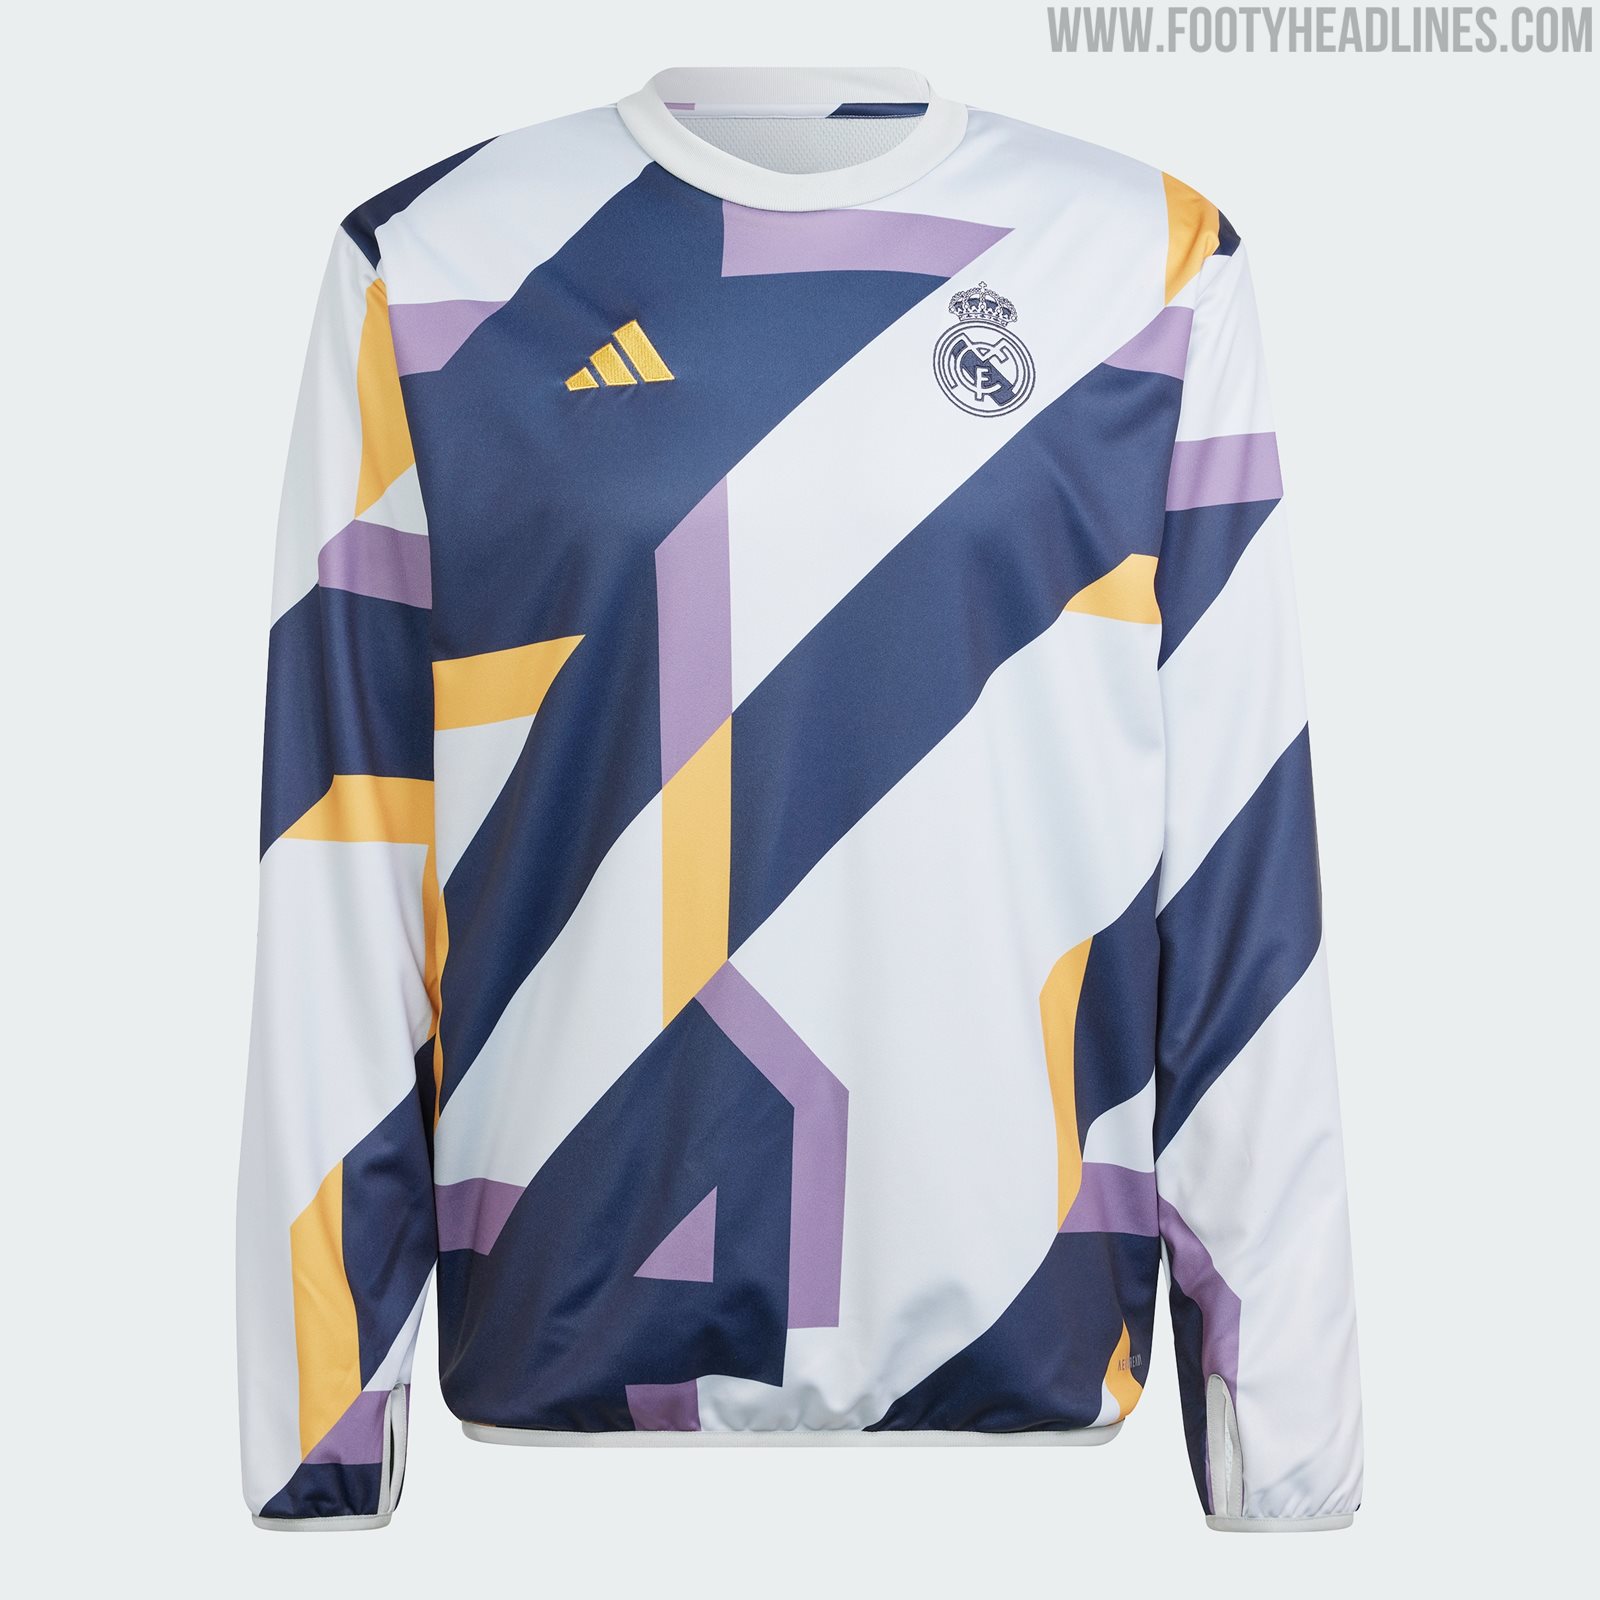 real madrid pre match jersey